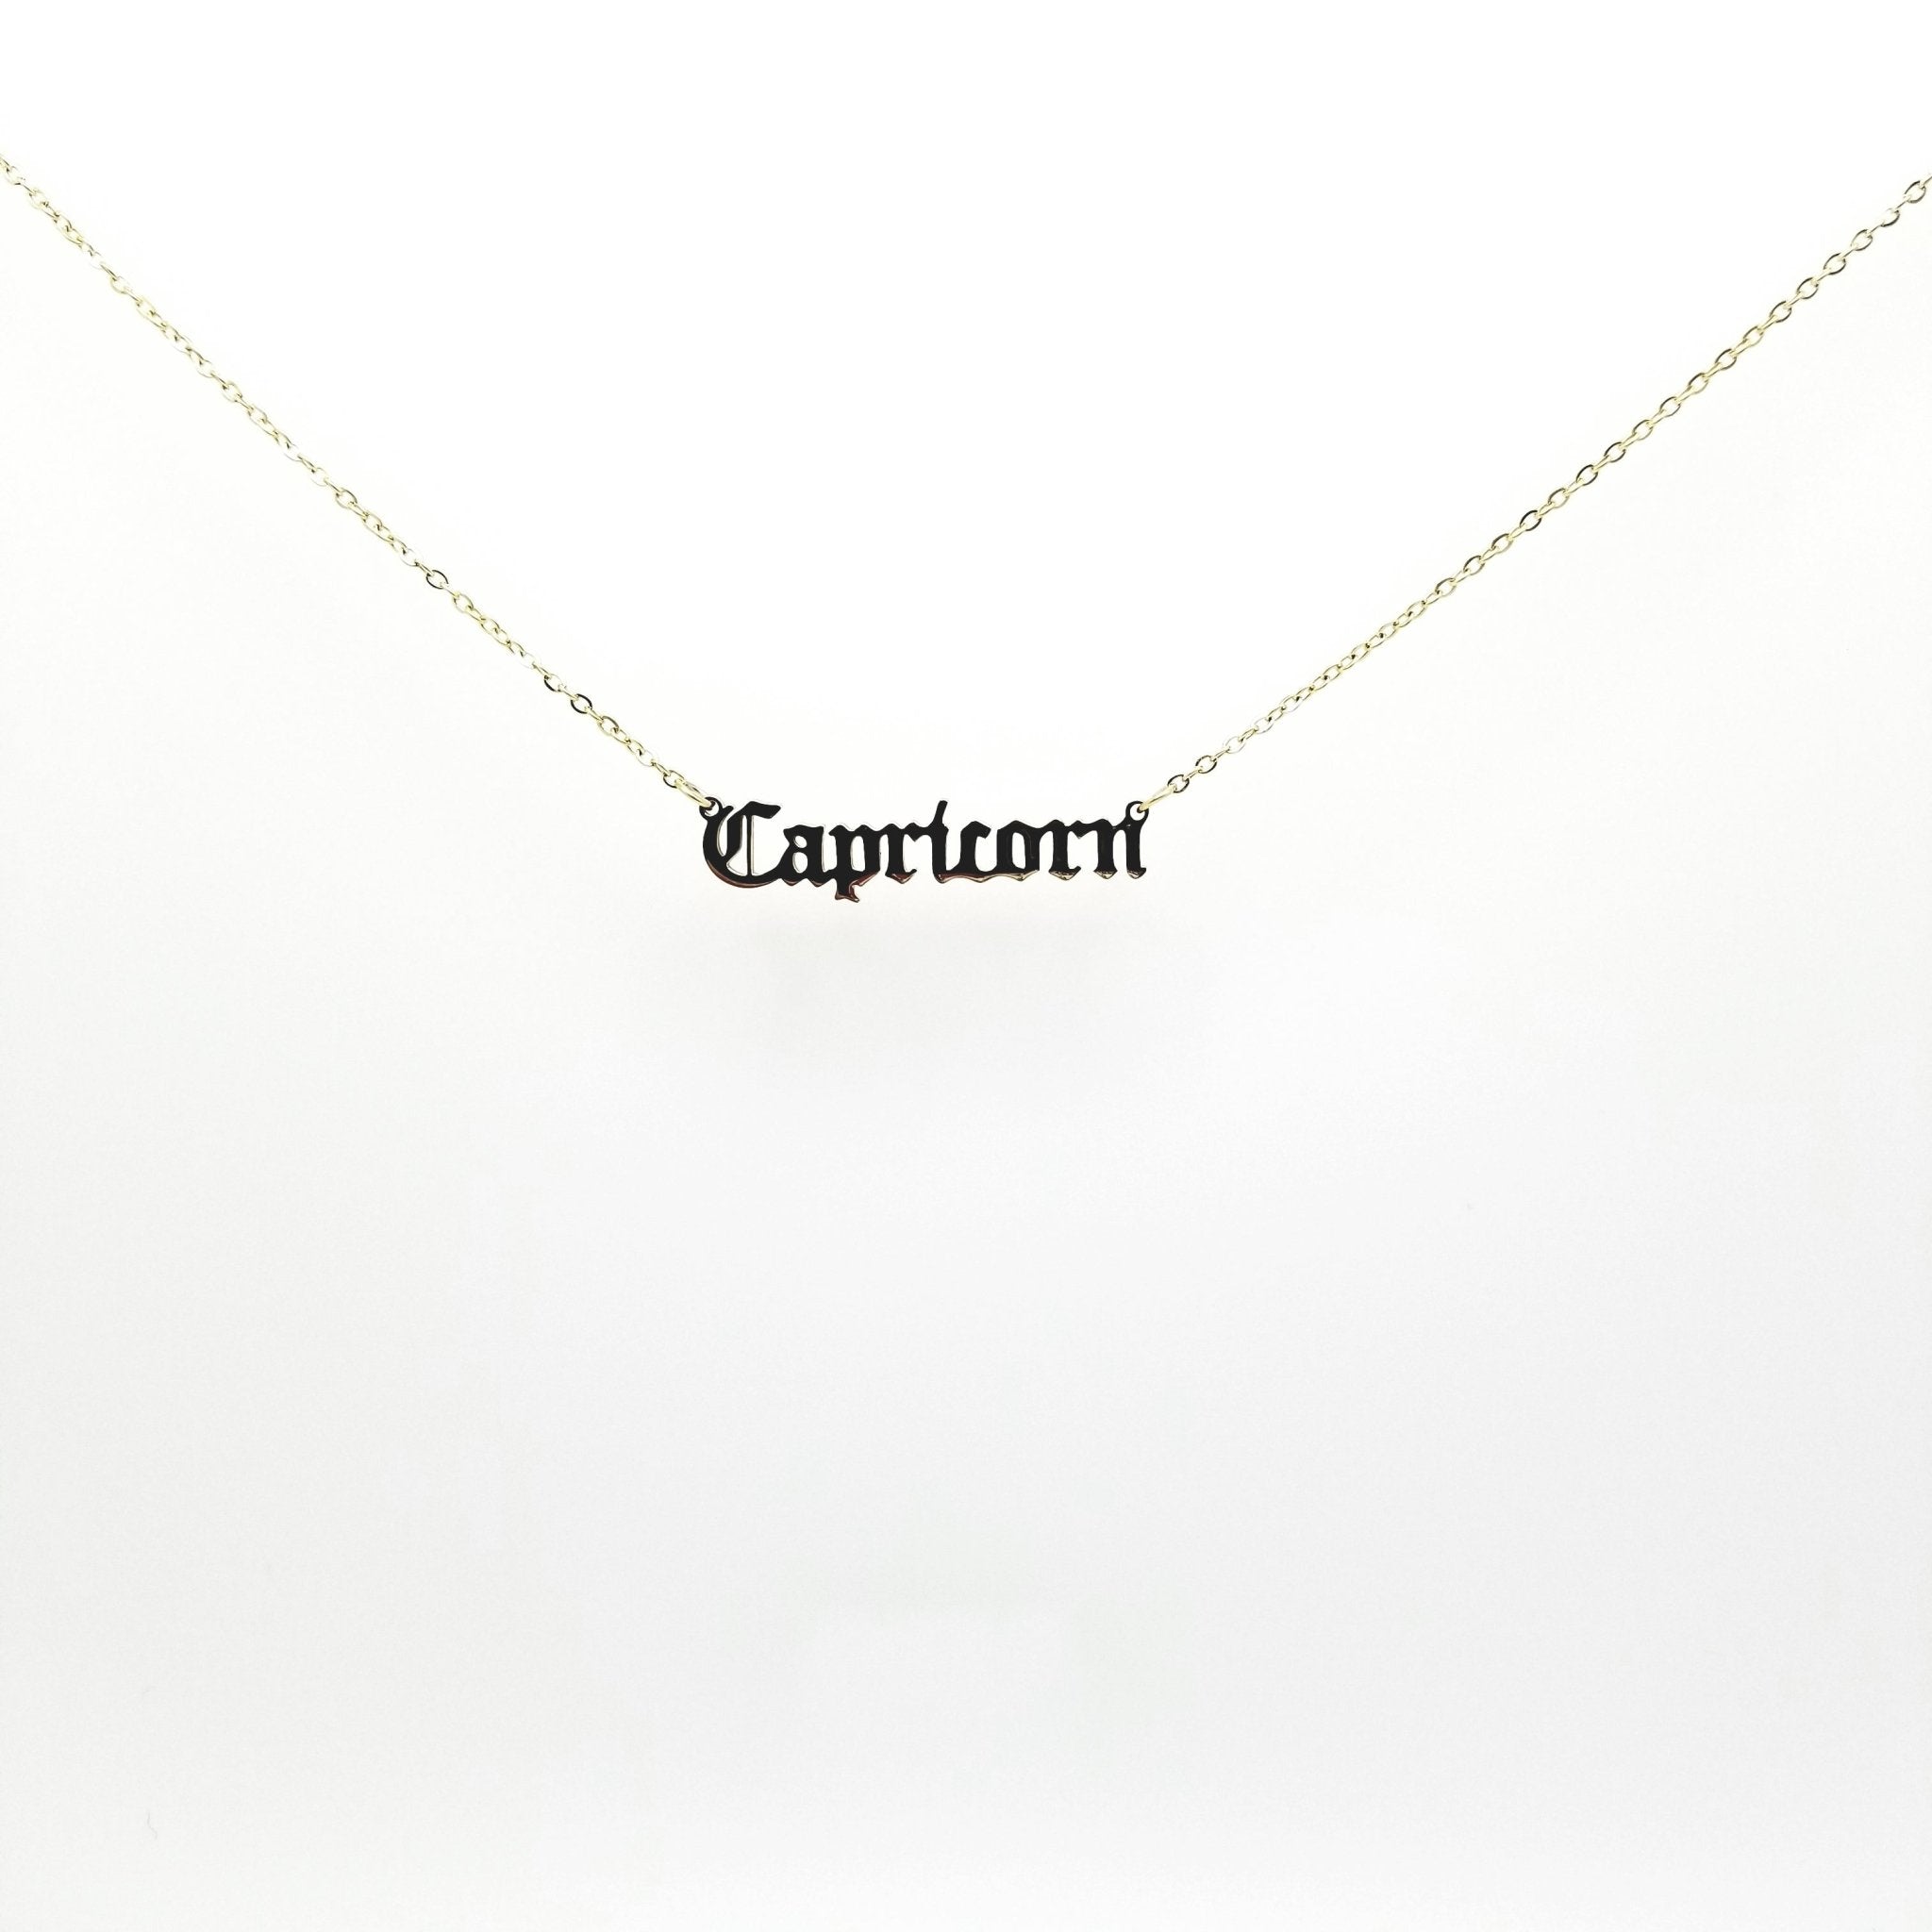 Capricorn Zodiac Name Necklaces| 18k Gold Plated - Spiral Circle